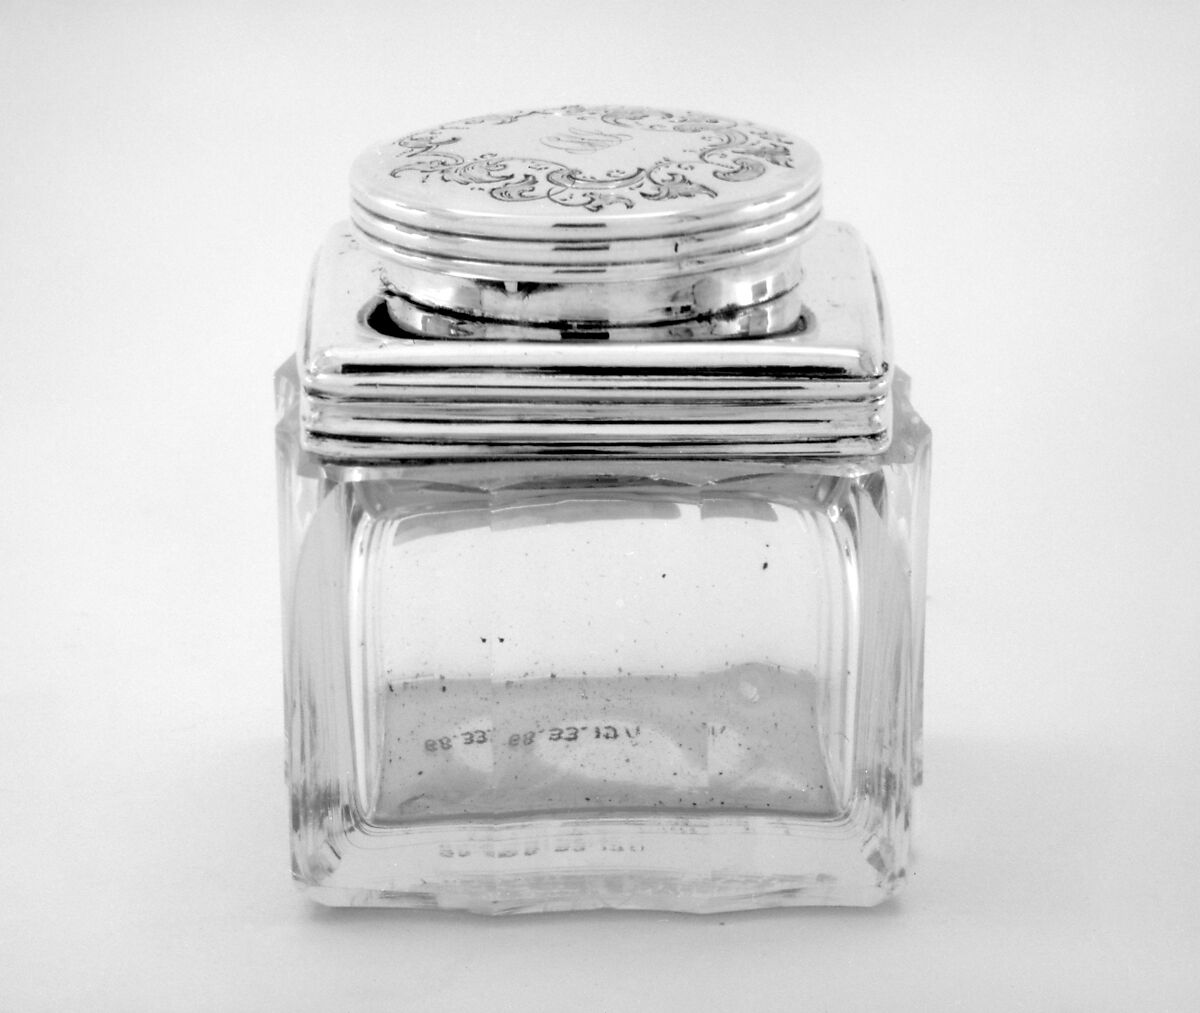 Pounce shaker with cover (part of a set), Silver, crystal, Russian, St. Petersburg 